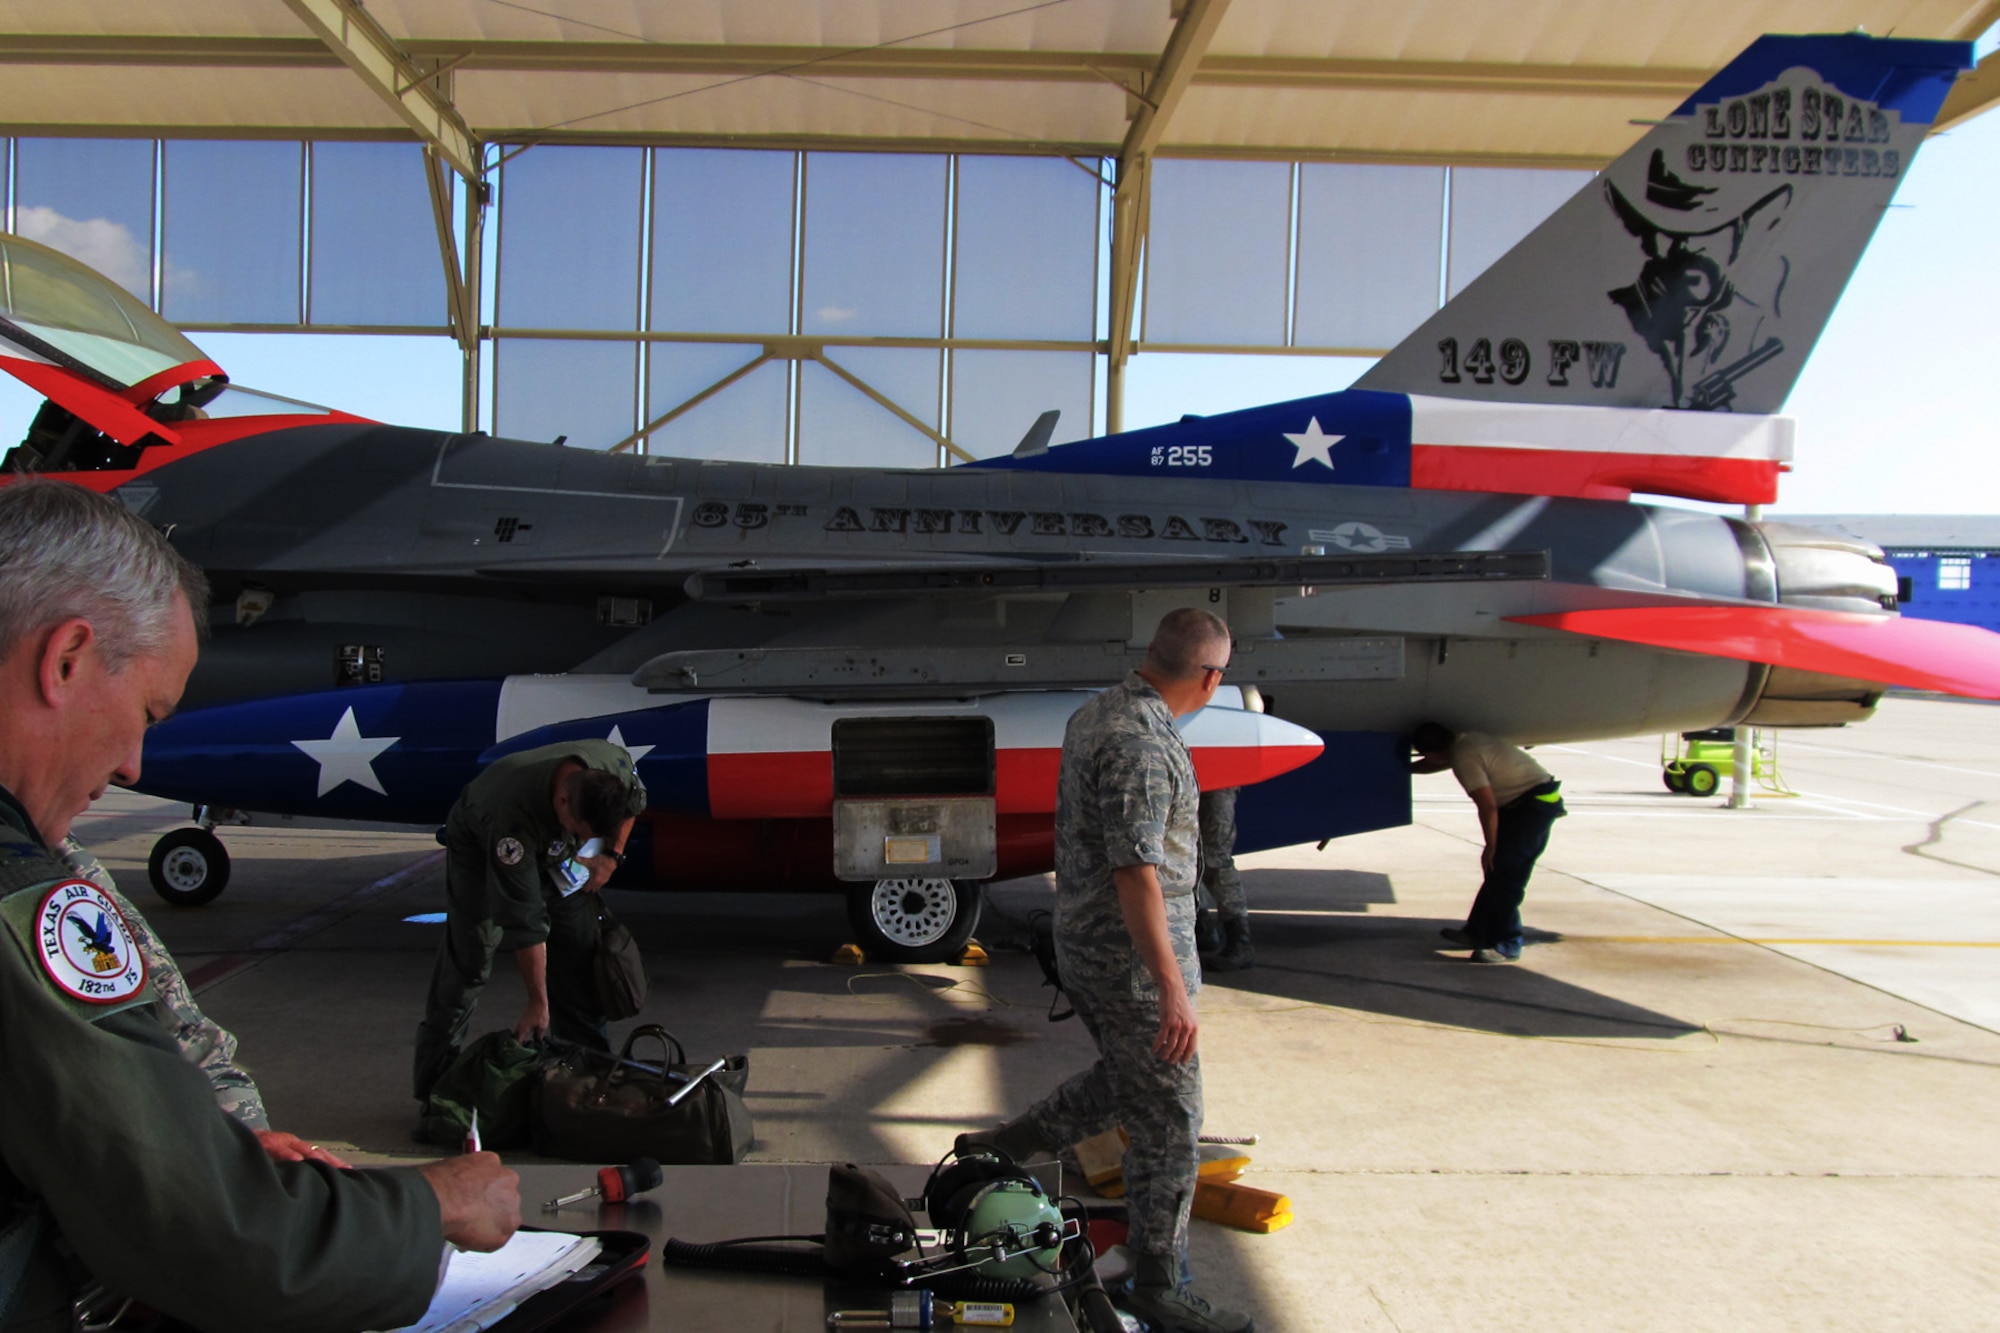 The Texas Air National Guard's 149th Fighter Wing's flagship F-16 returning to Lackland Air Force Base after being painted to honor the 65th anniversary of the unit's affiliation with the Air National Guard, Sept. 29, 2011.  Colonel (Col.) John Kane (left), wing commander, preparing the aircraft's forms for return to maintenance personnel.  (Air National Guard photo by Staff Sgt. Phil Fountain/Released)